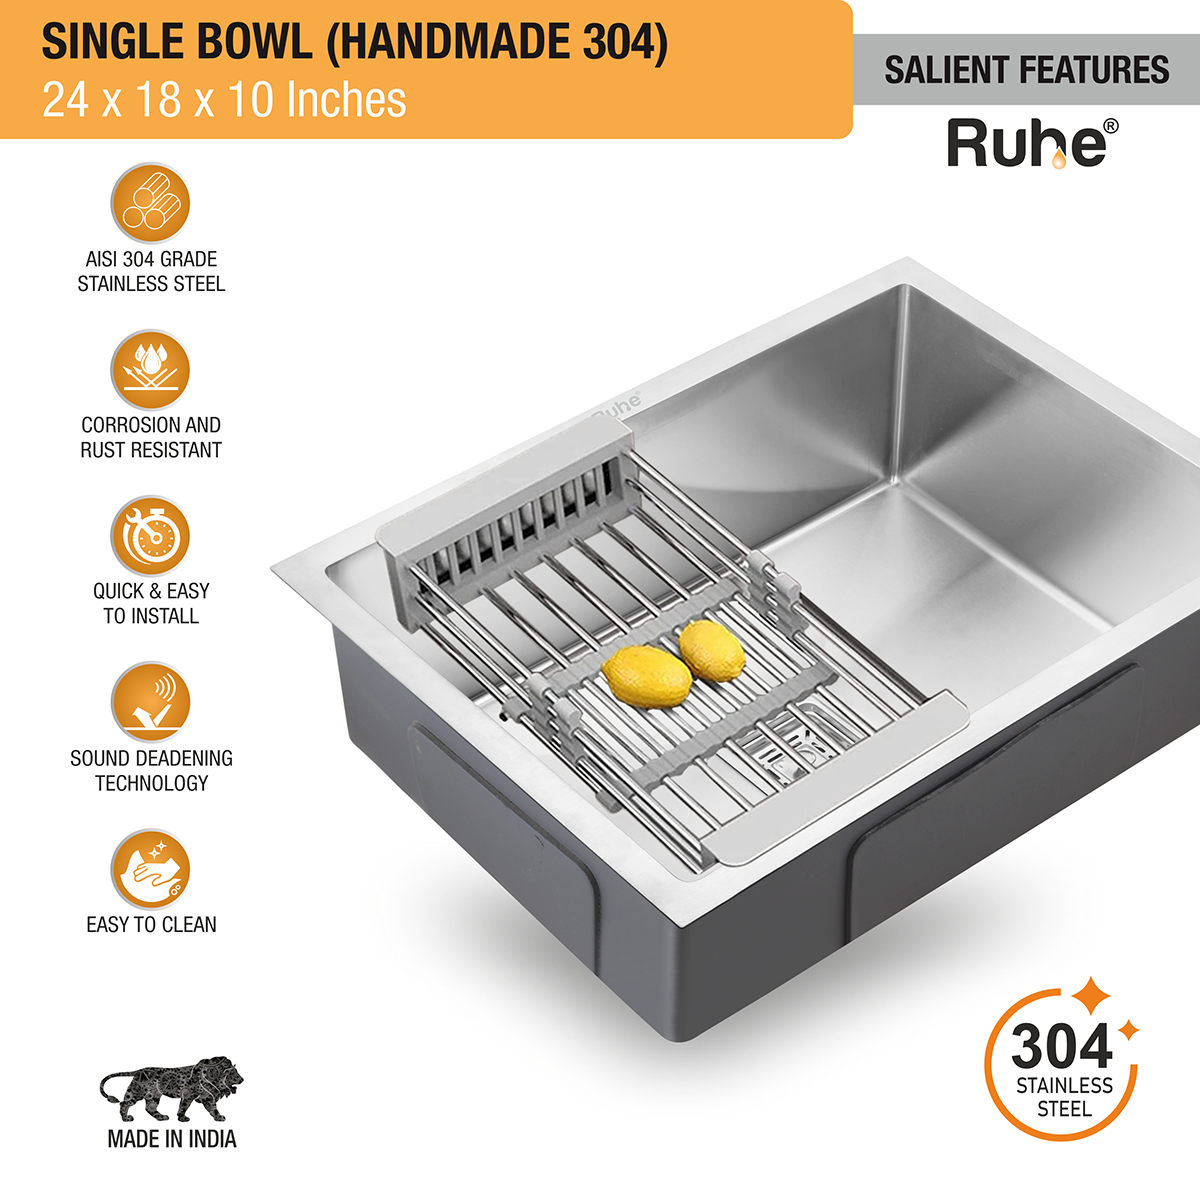 Handmade Single Bowl 304-Grade Kitchen Sink (24 x 18 x 10 Inches) features and benefits